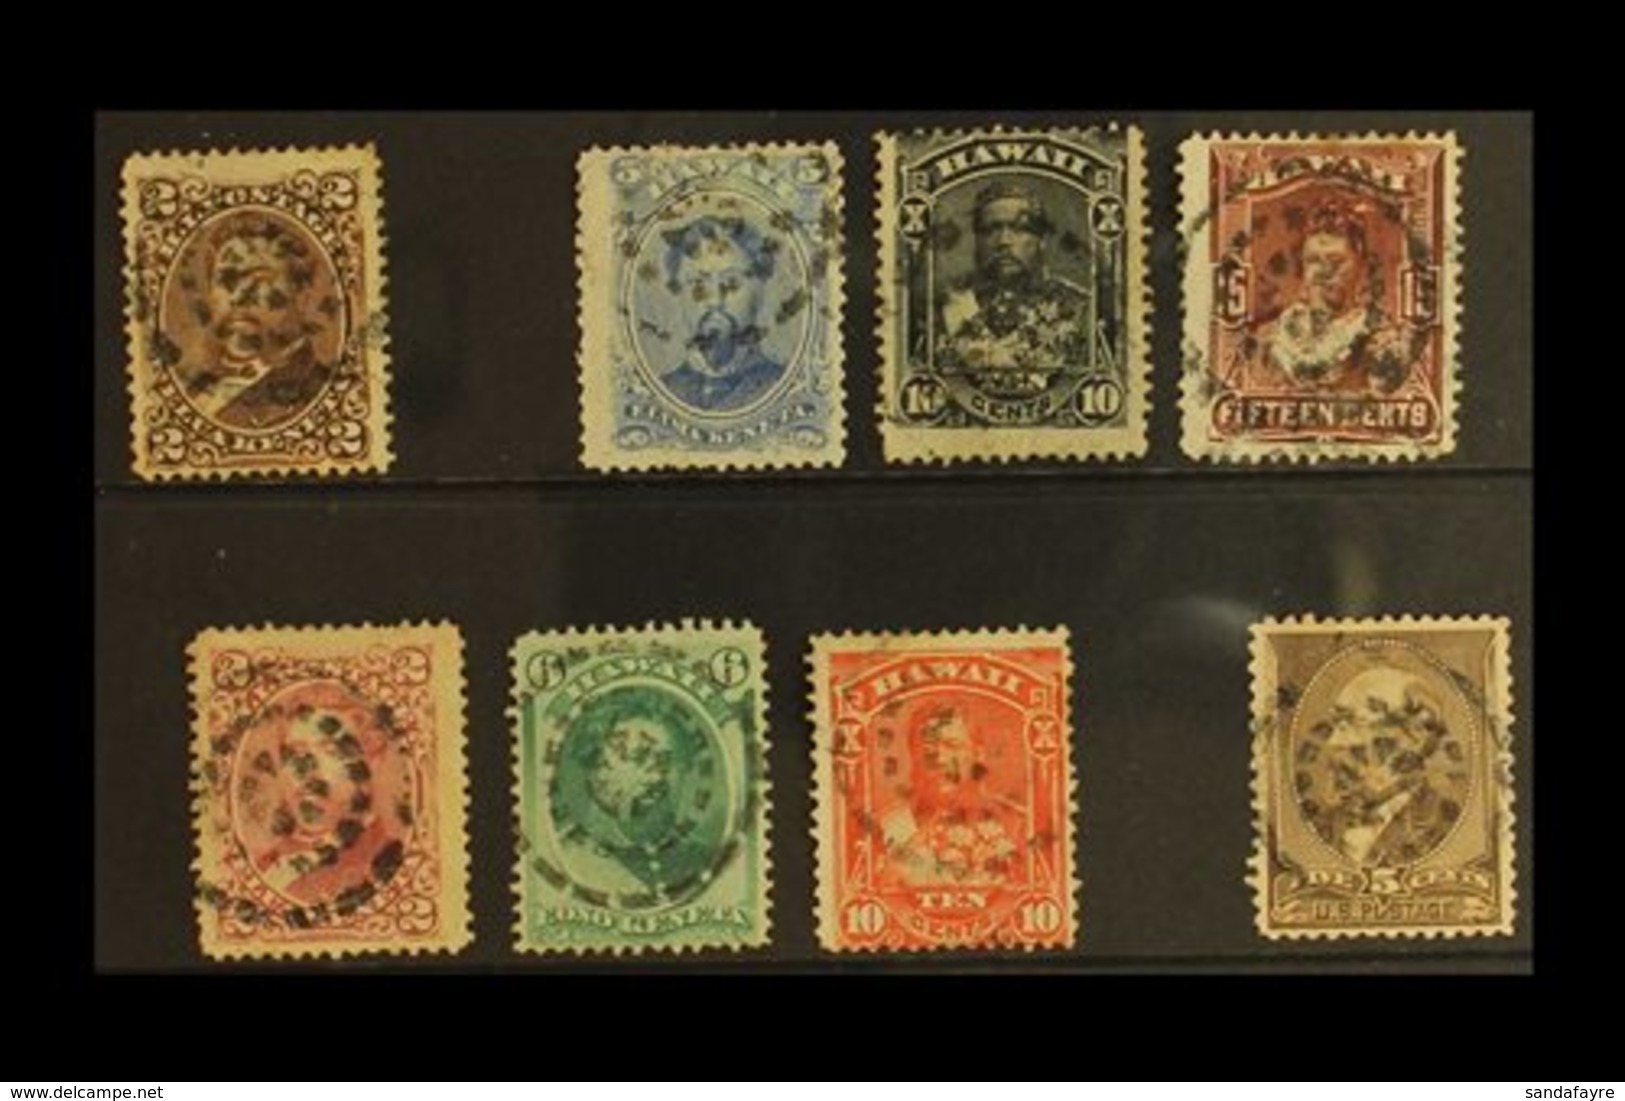 POSTMARKS  DISTINCTIVE TARGET STYLE CANCEL On Range Of 1875-86 Issues, All Different With Values To 15c, Plus USA 1882 5 - Hawaï